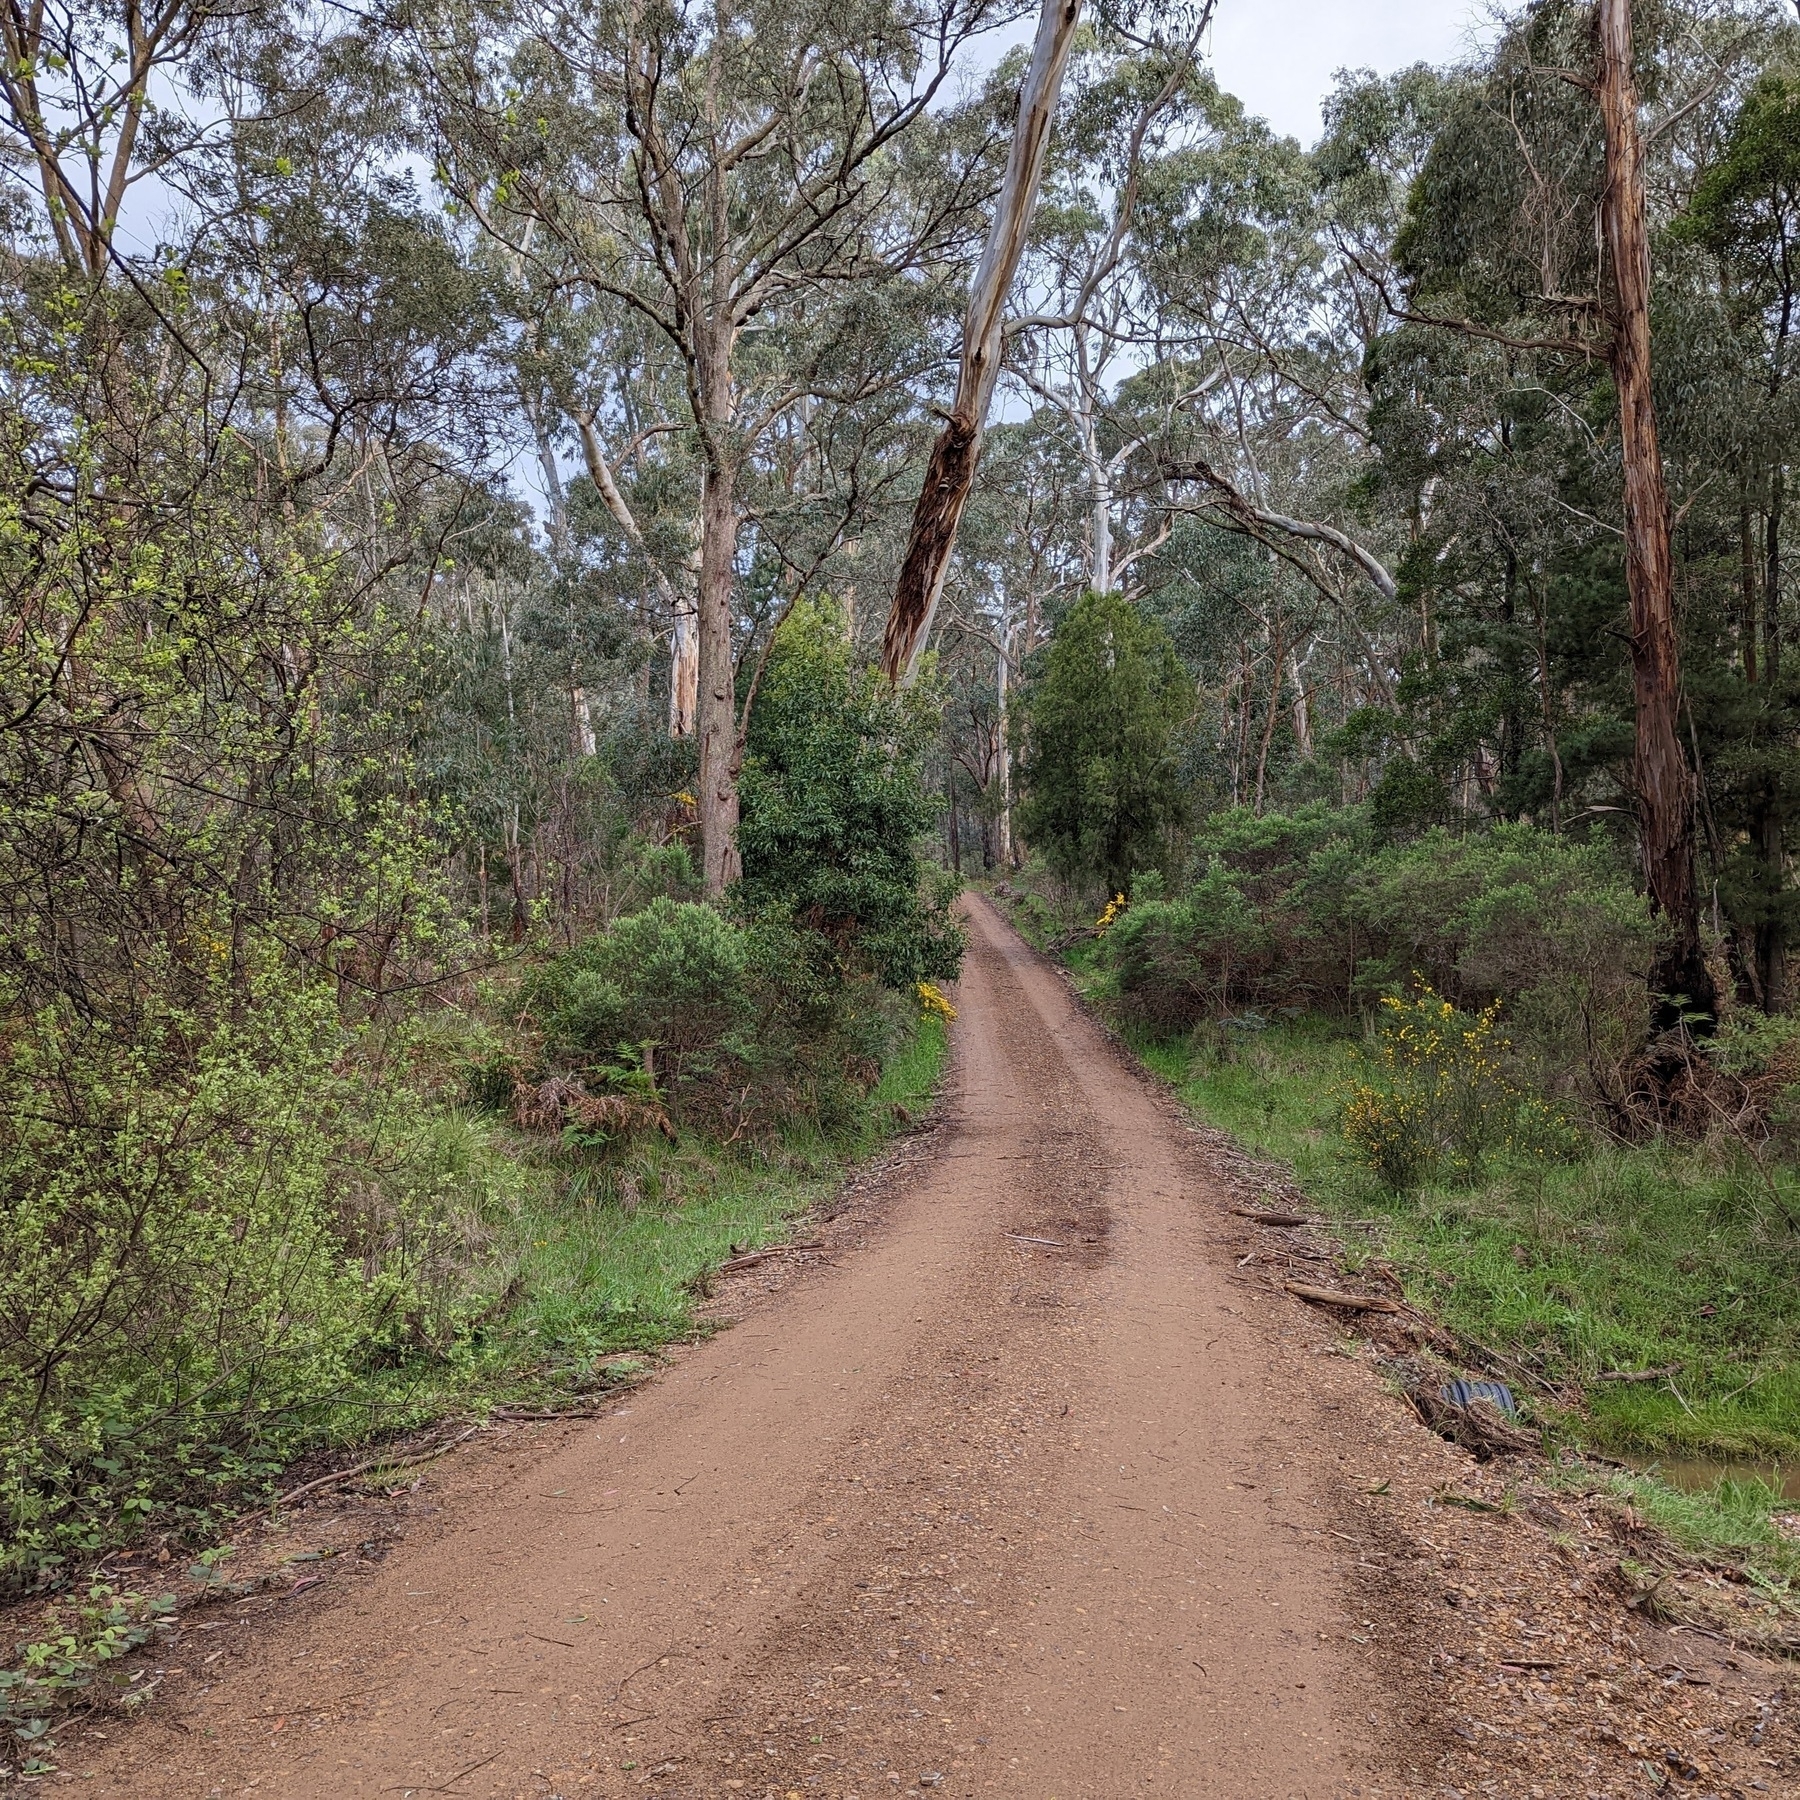 Dirt road travelling through a forest.